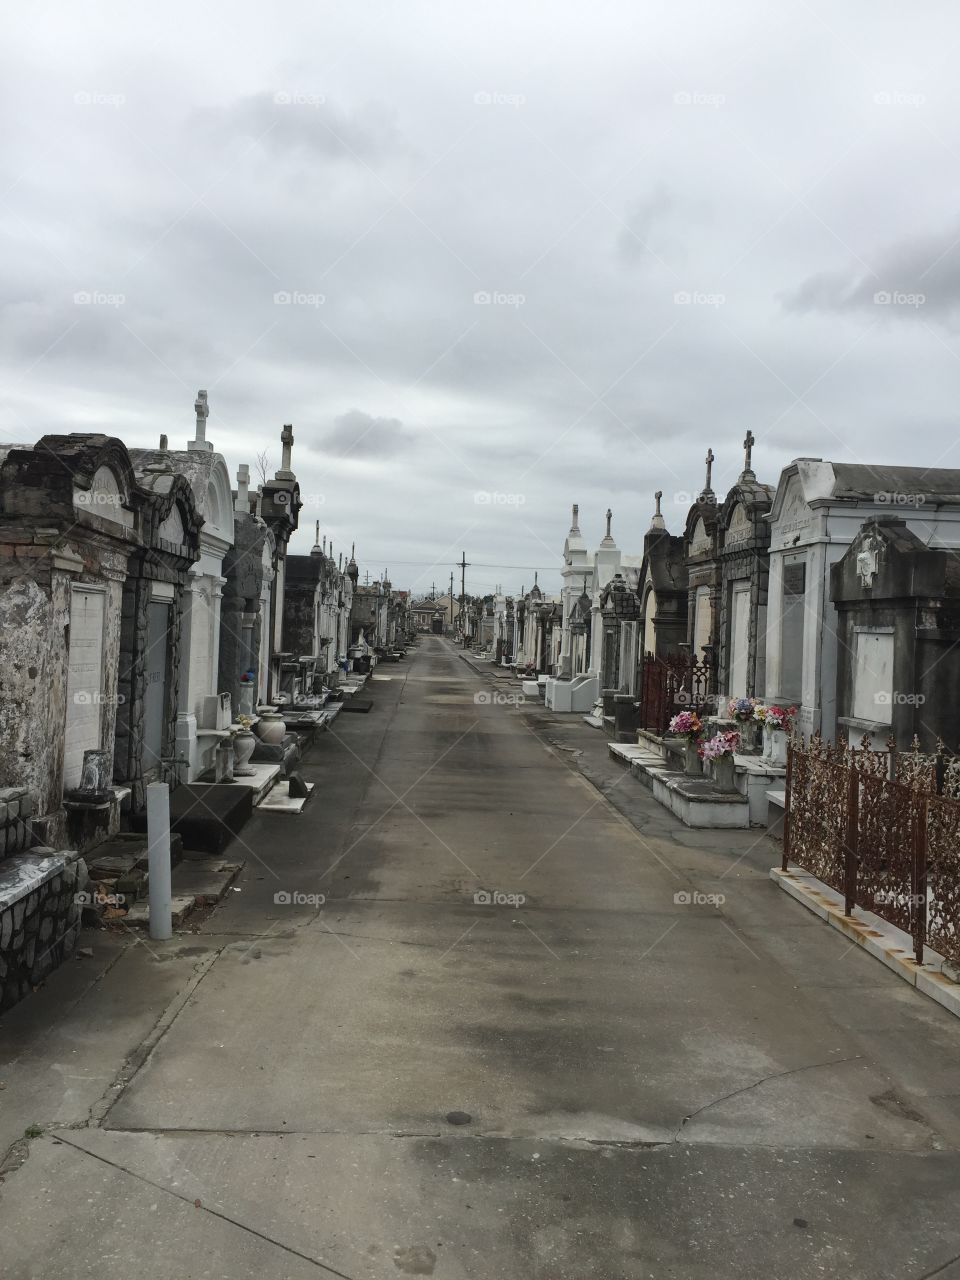 Cemetery Lafayette, New Orleans